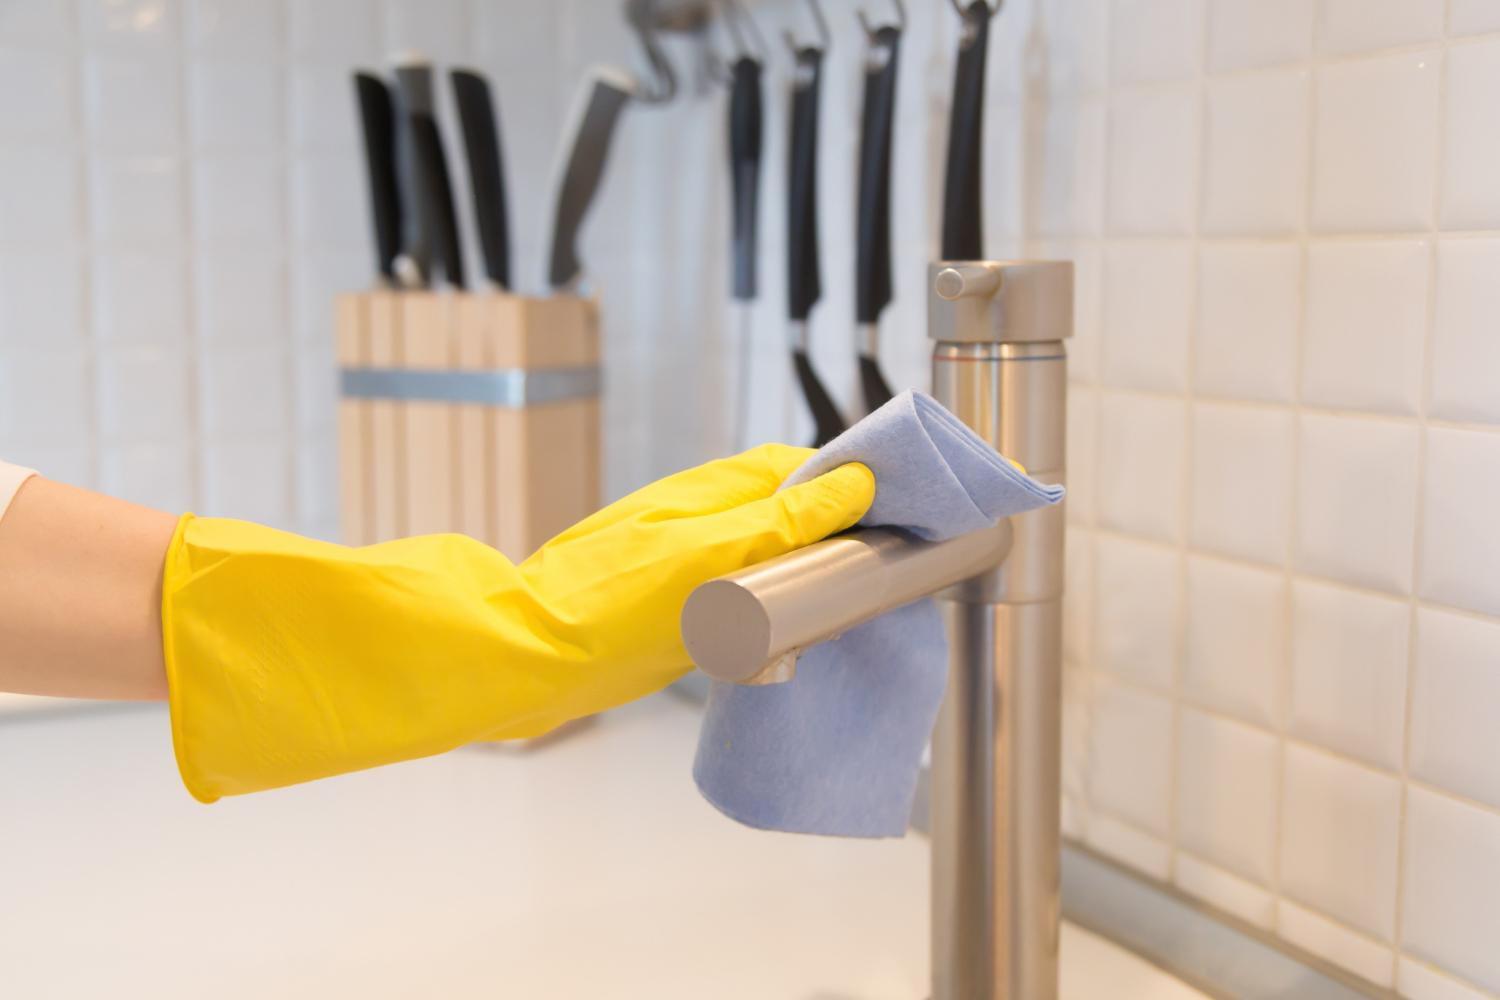 5 Best Plumbing Cleaning to Do While You’re Stuck At Home